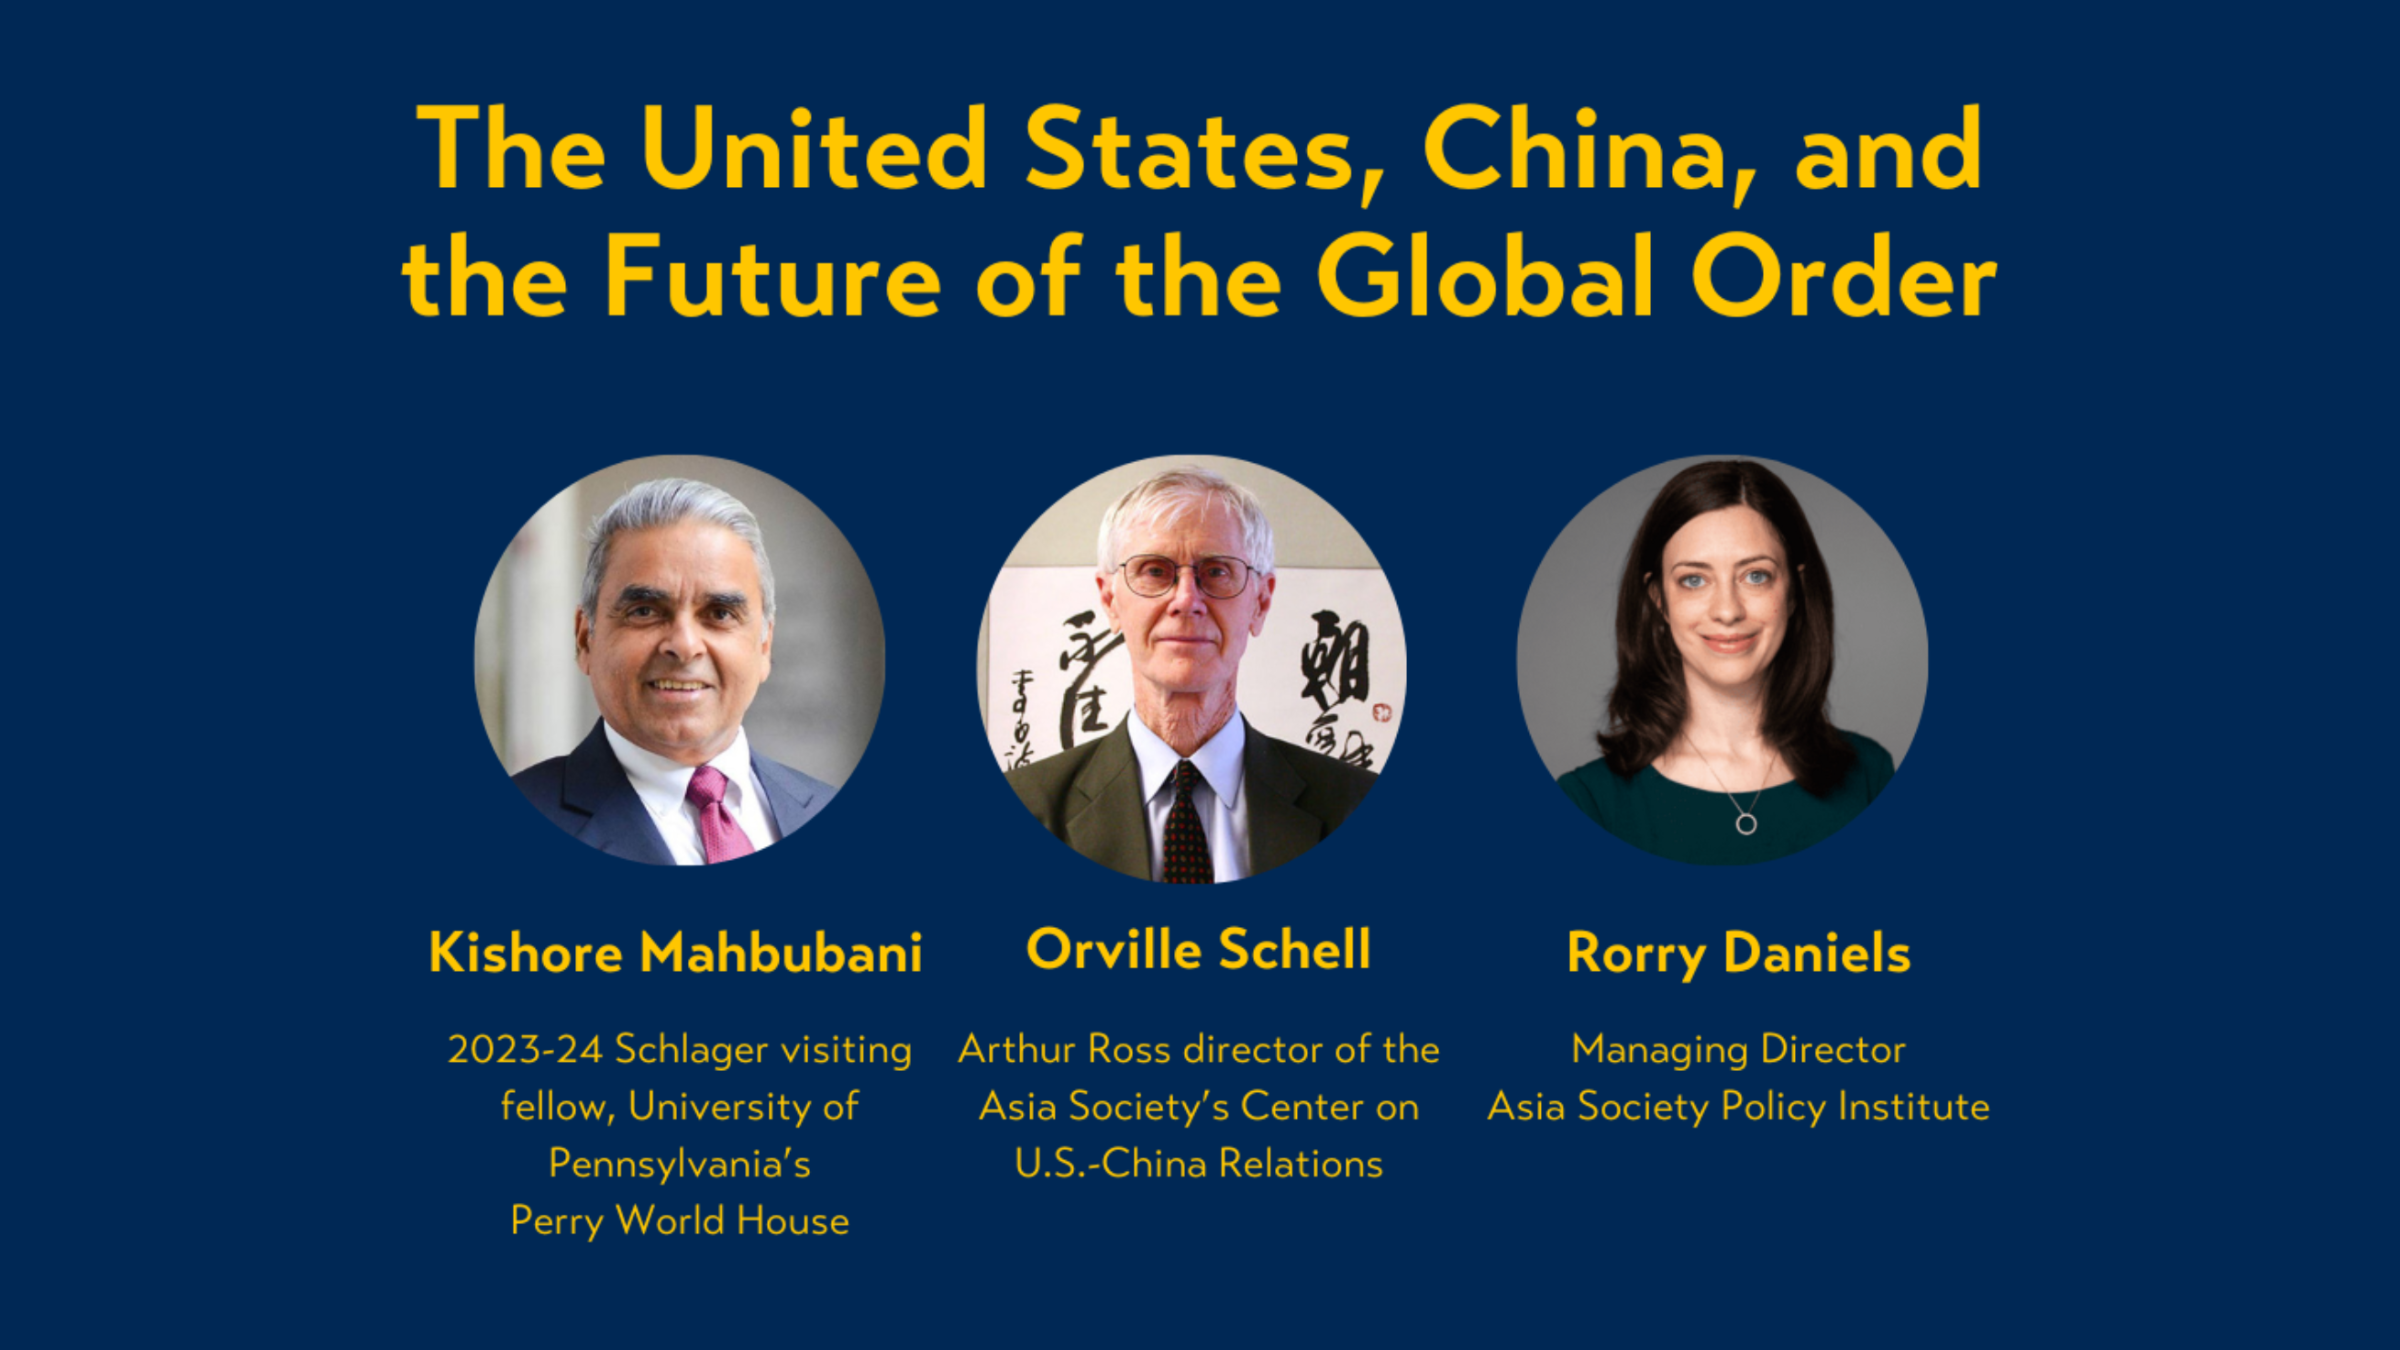  The United States, China, and the Future of the Global Order